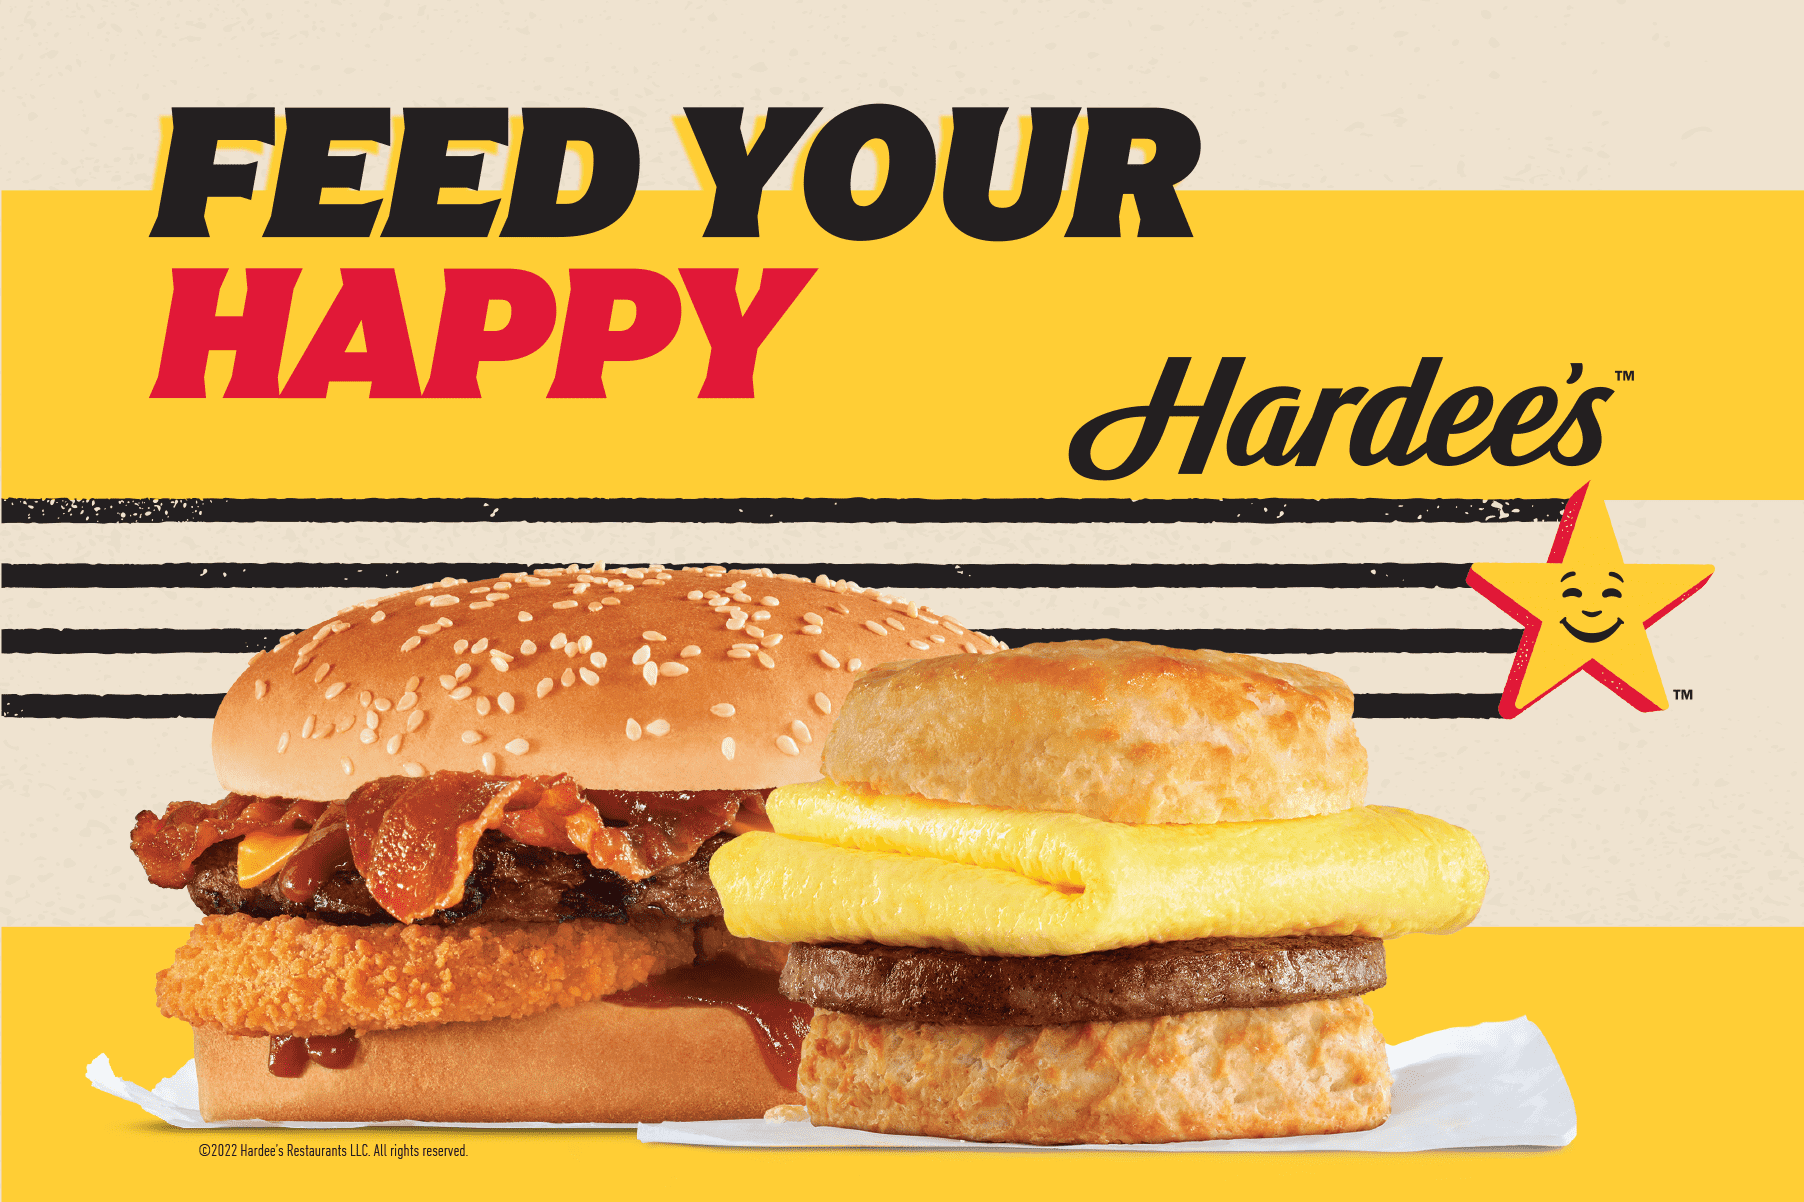 hardee's ad with a bbacon burger and a egg and sausage biscuit